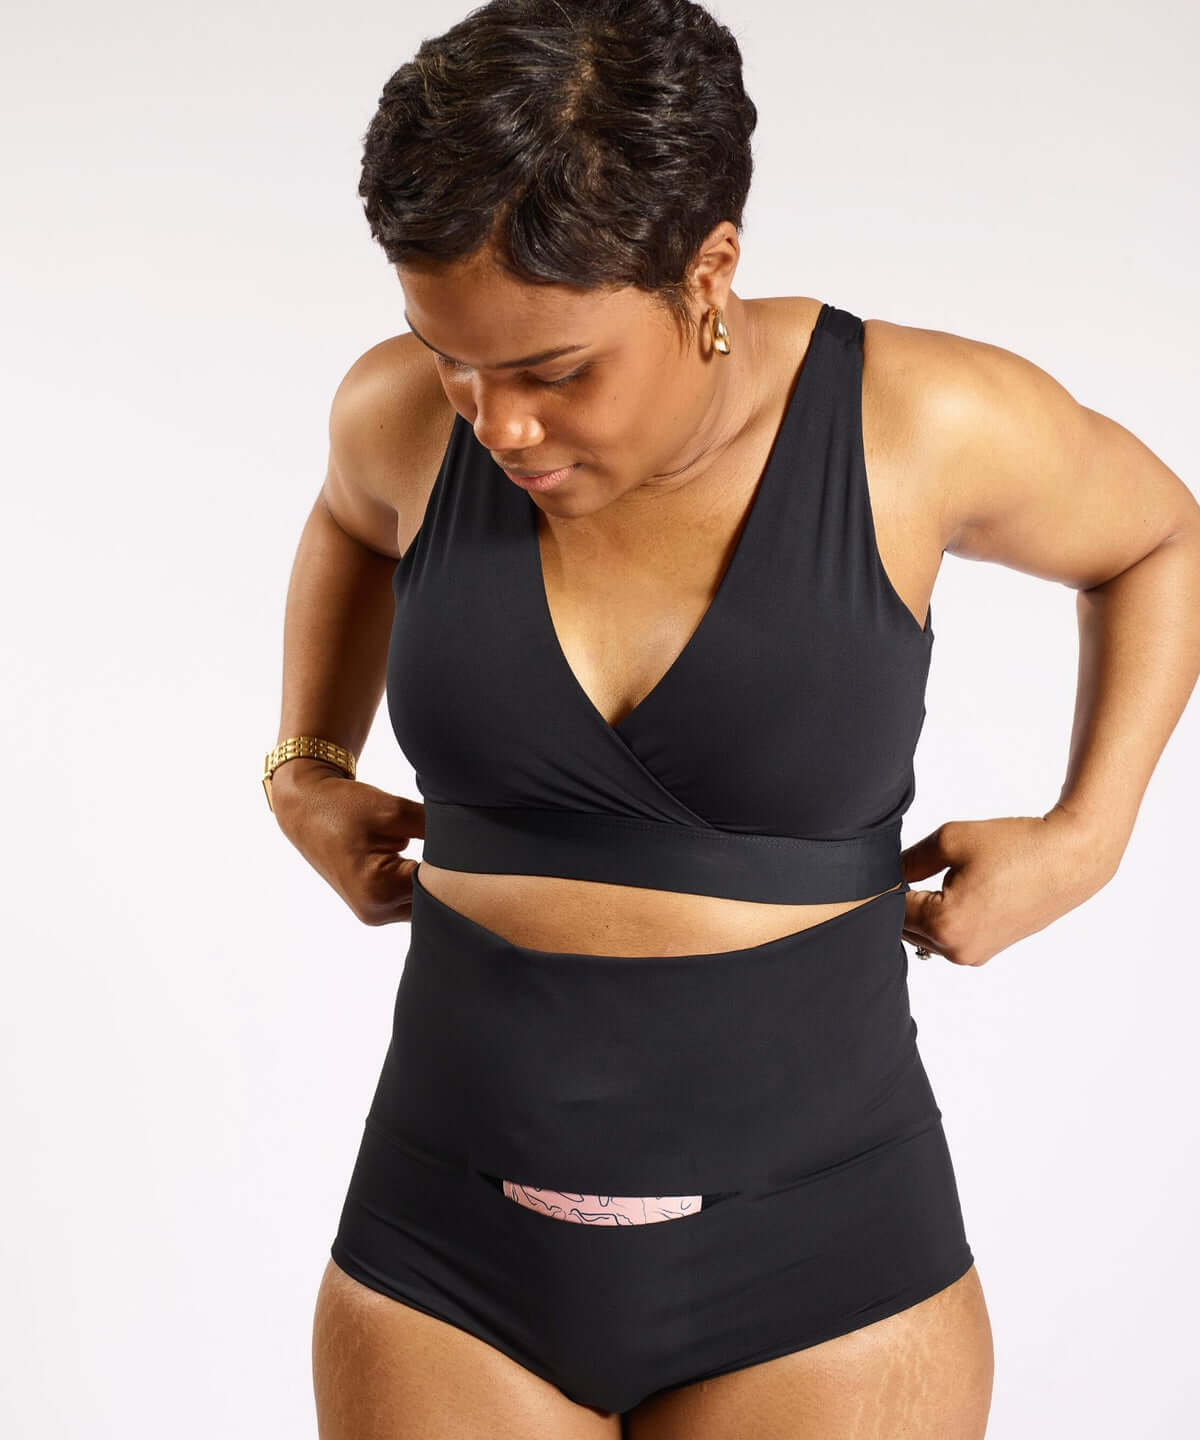 Postpartum compression underwear help reduce swelling and mommy